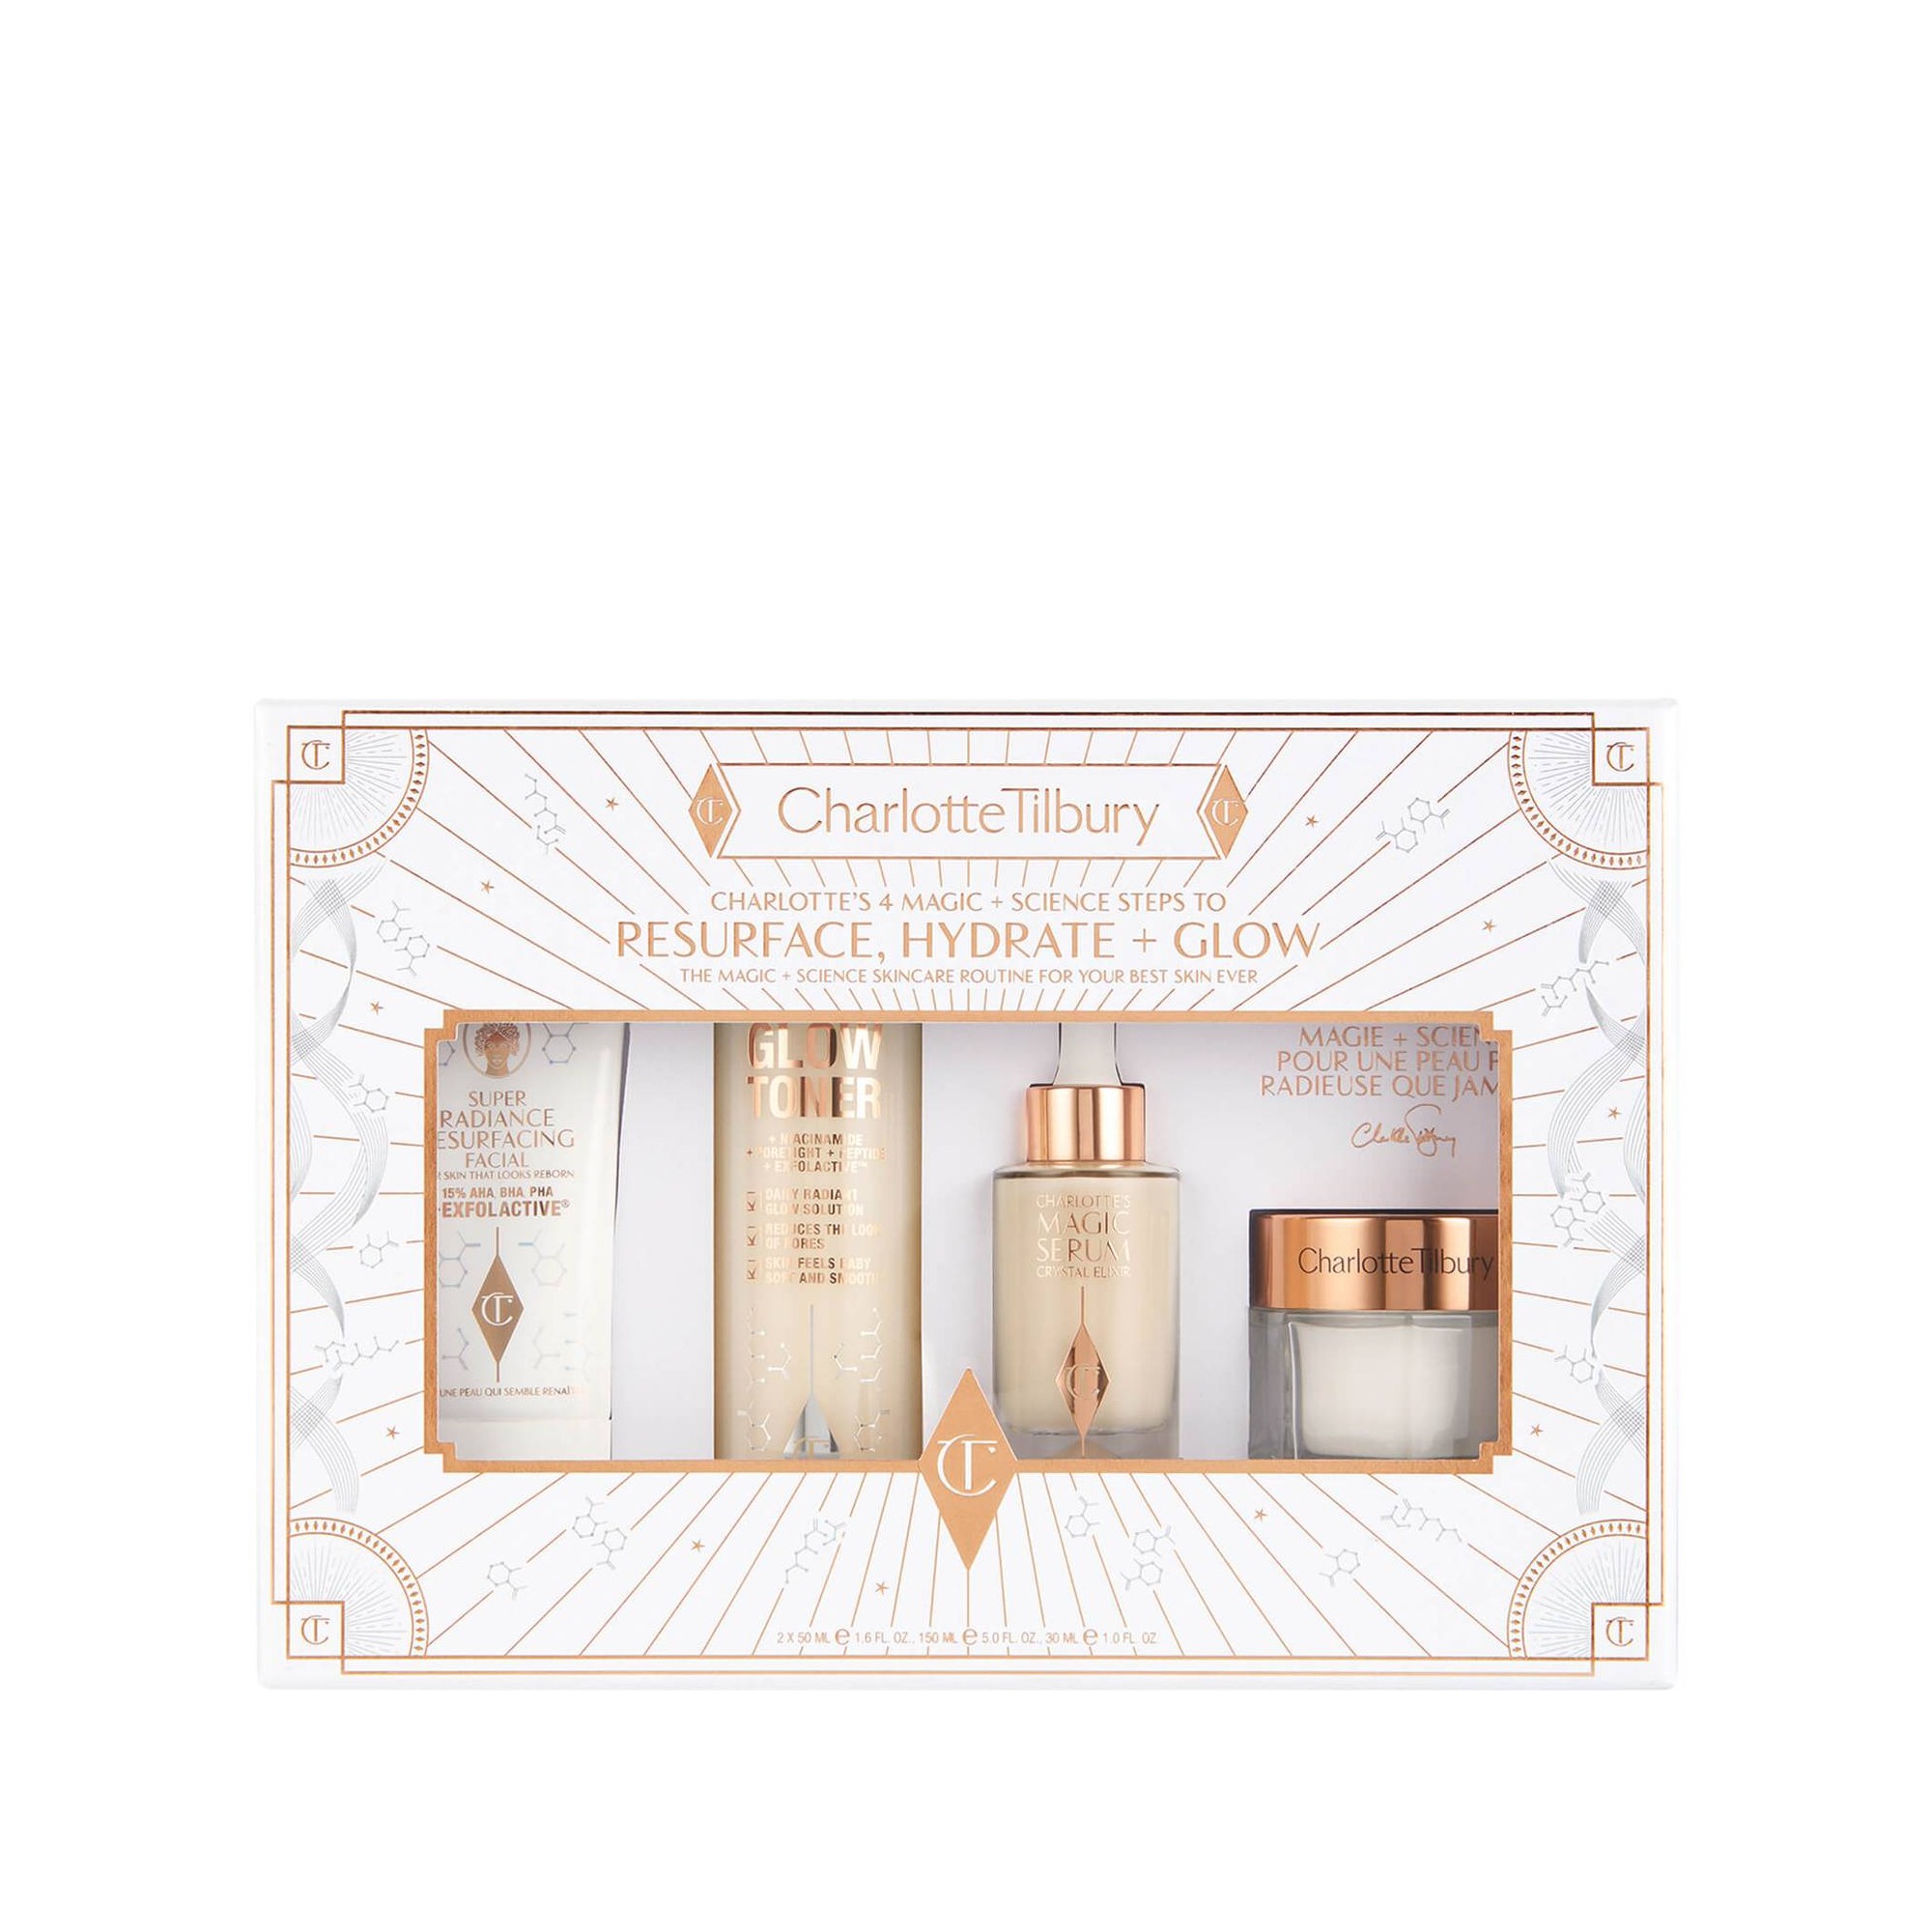 Charlotte Tilbury Charlotte's 4 Magic + Science Steps To Resurface, Hydrate & Glow